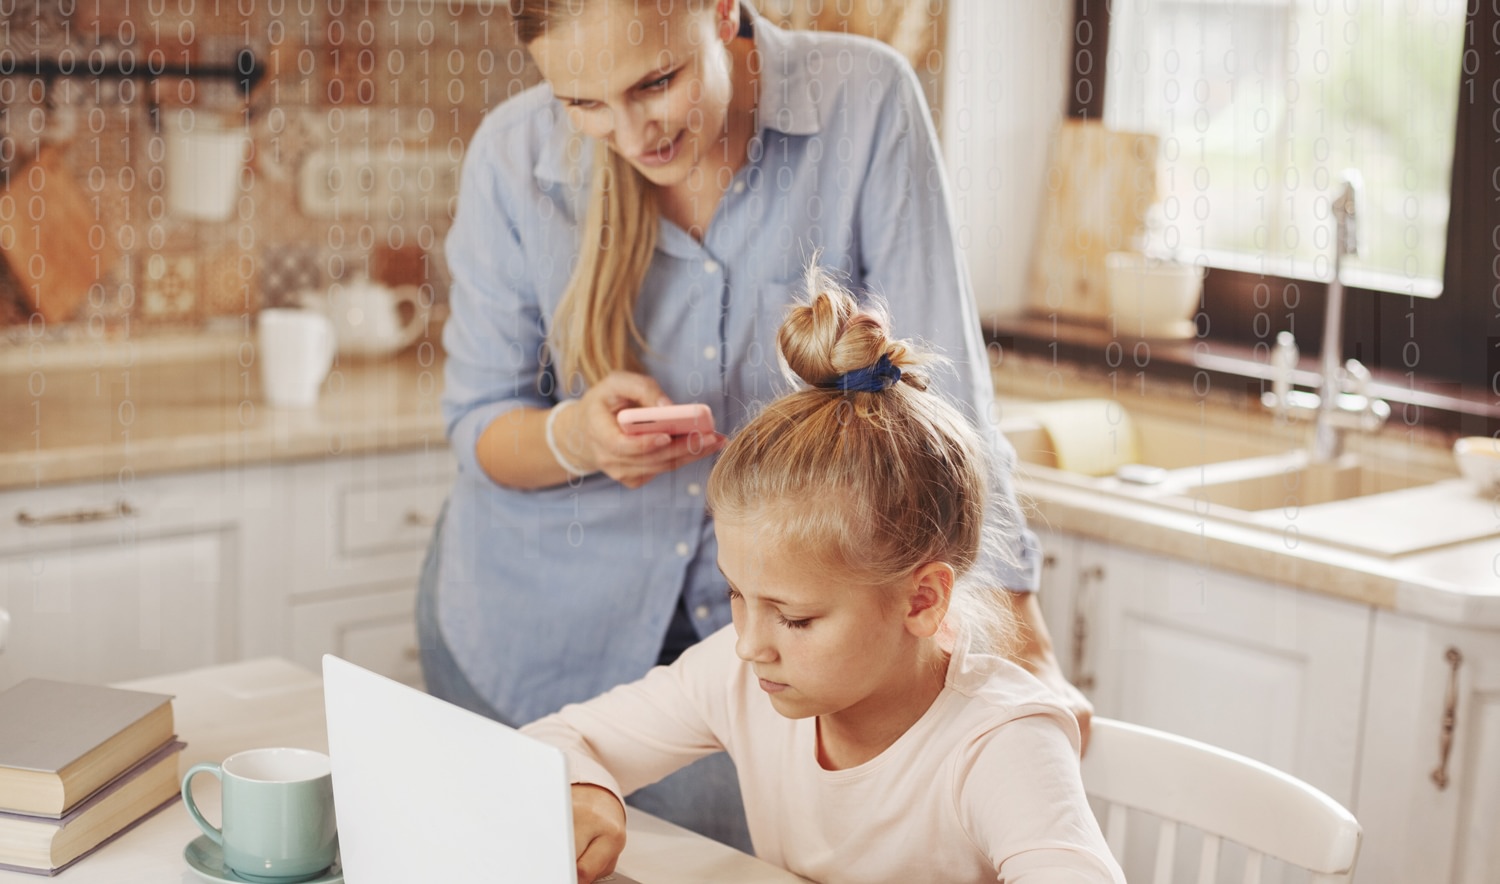 Parent looking over child's internet usage